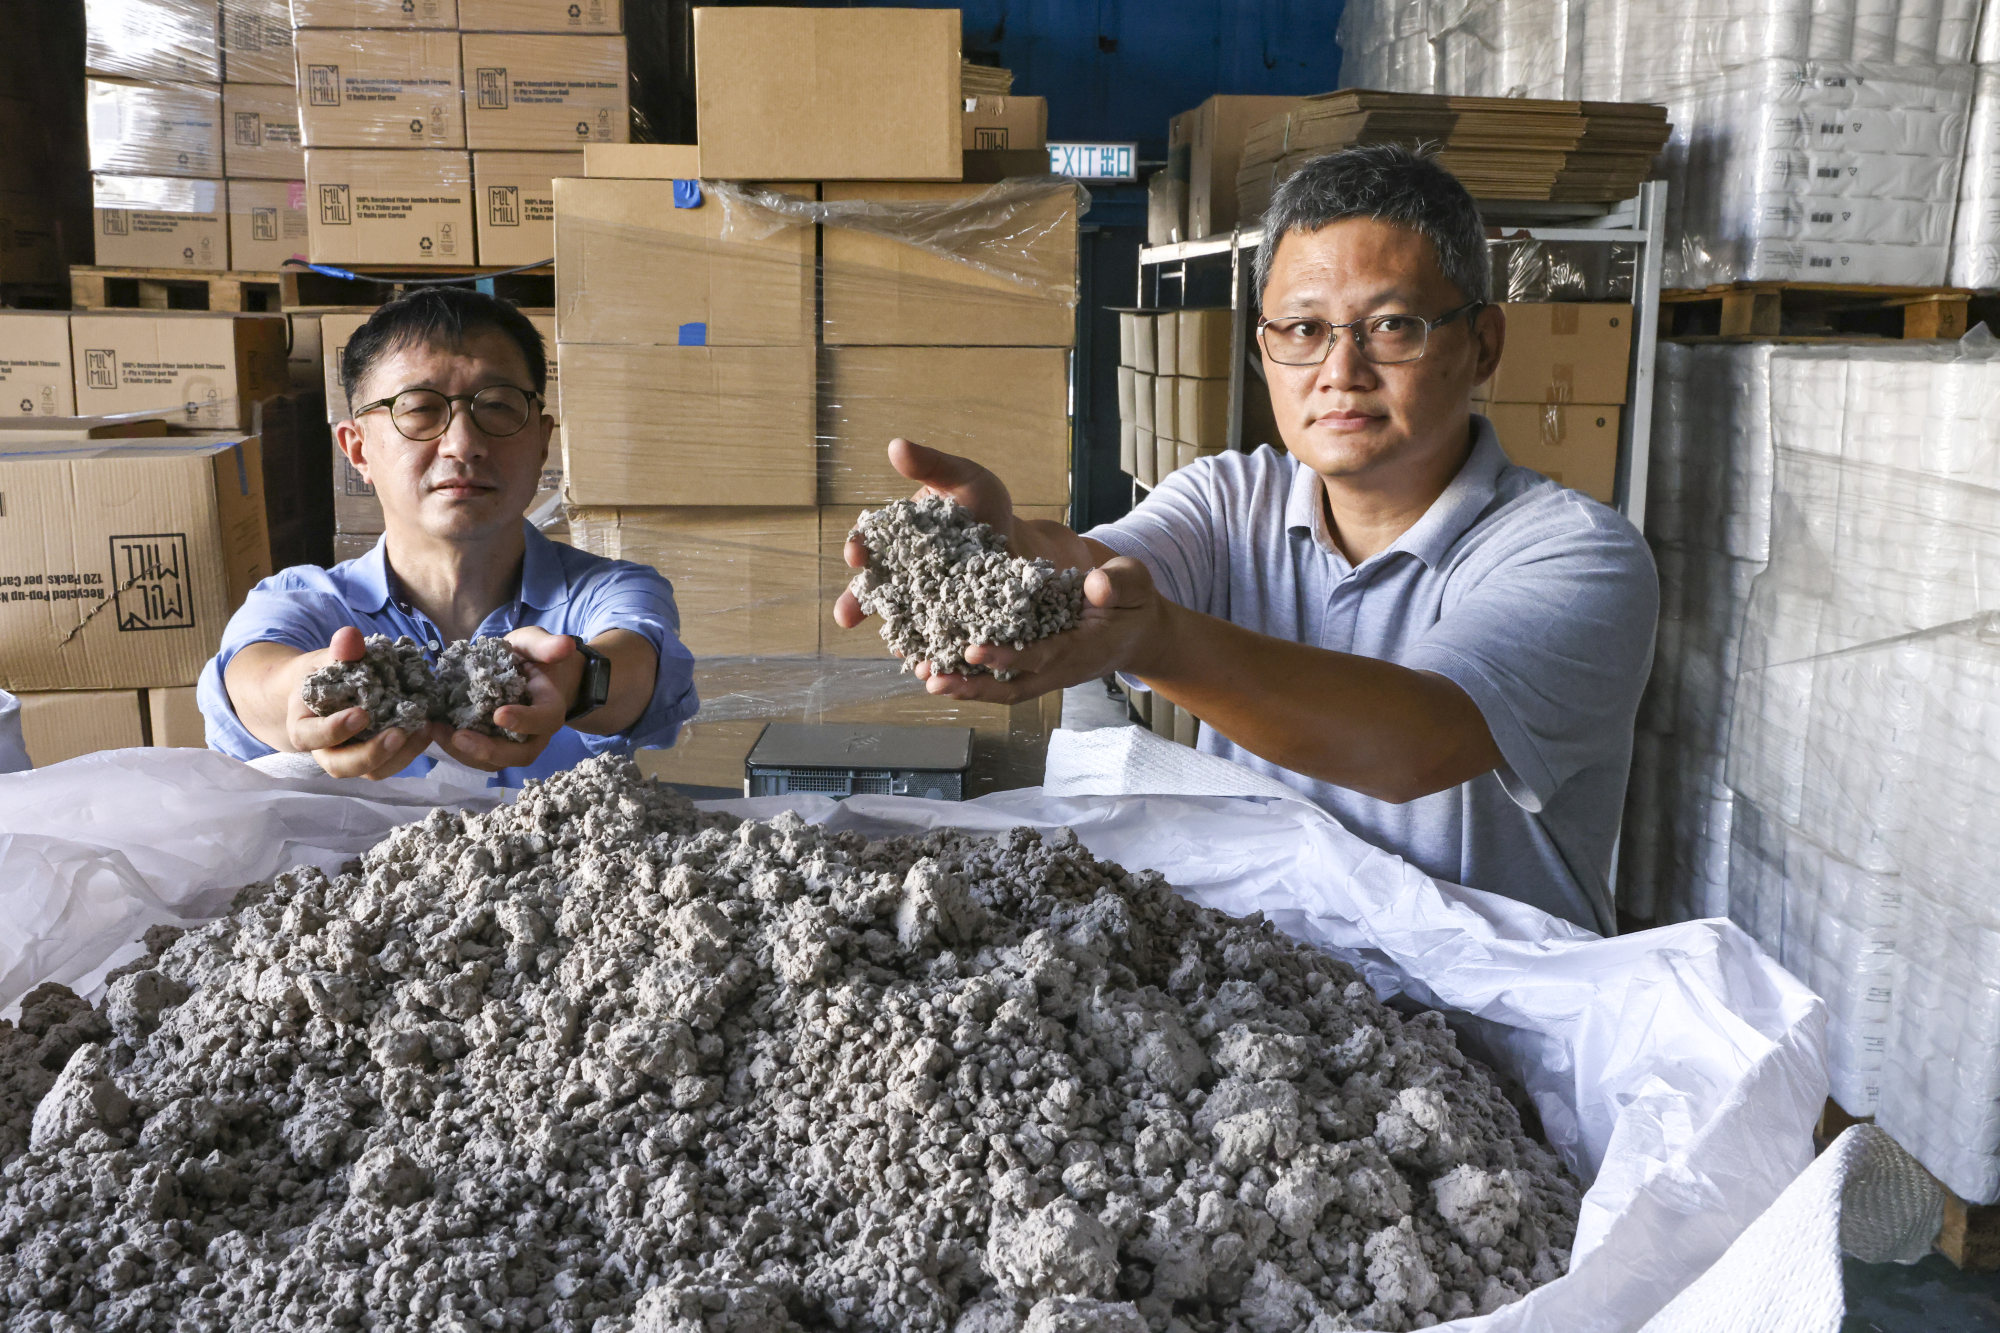 Co-founders of Mil Mill Harold Yip (left) and Nigel Lo at the recycling factory in Yuen Long. Photo: K. Y. Cheng